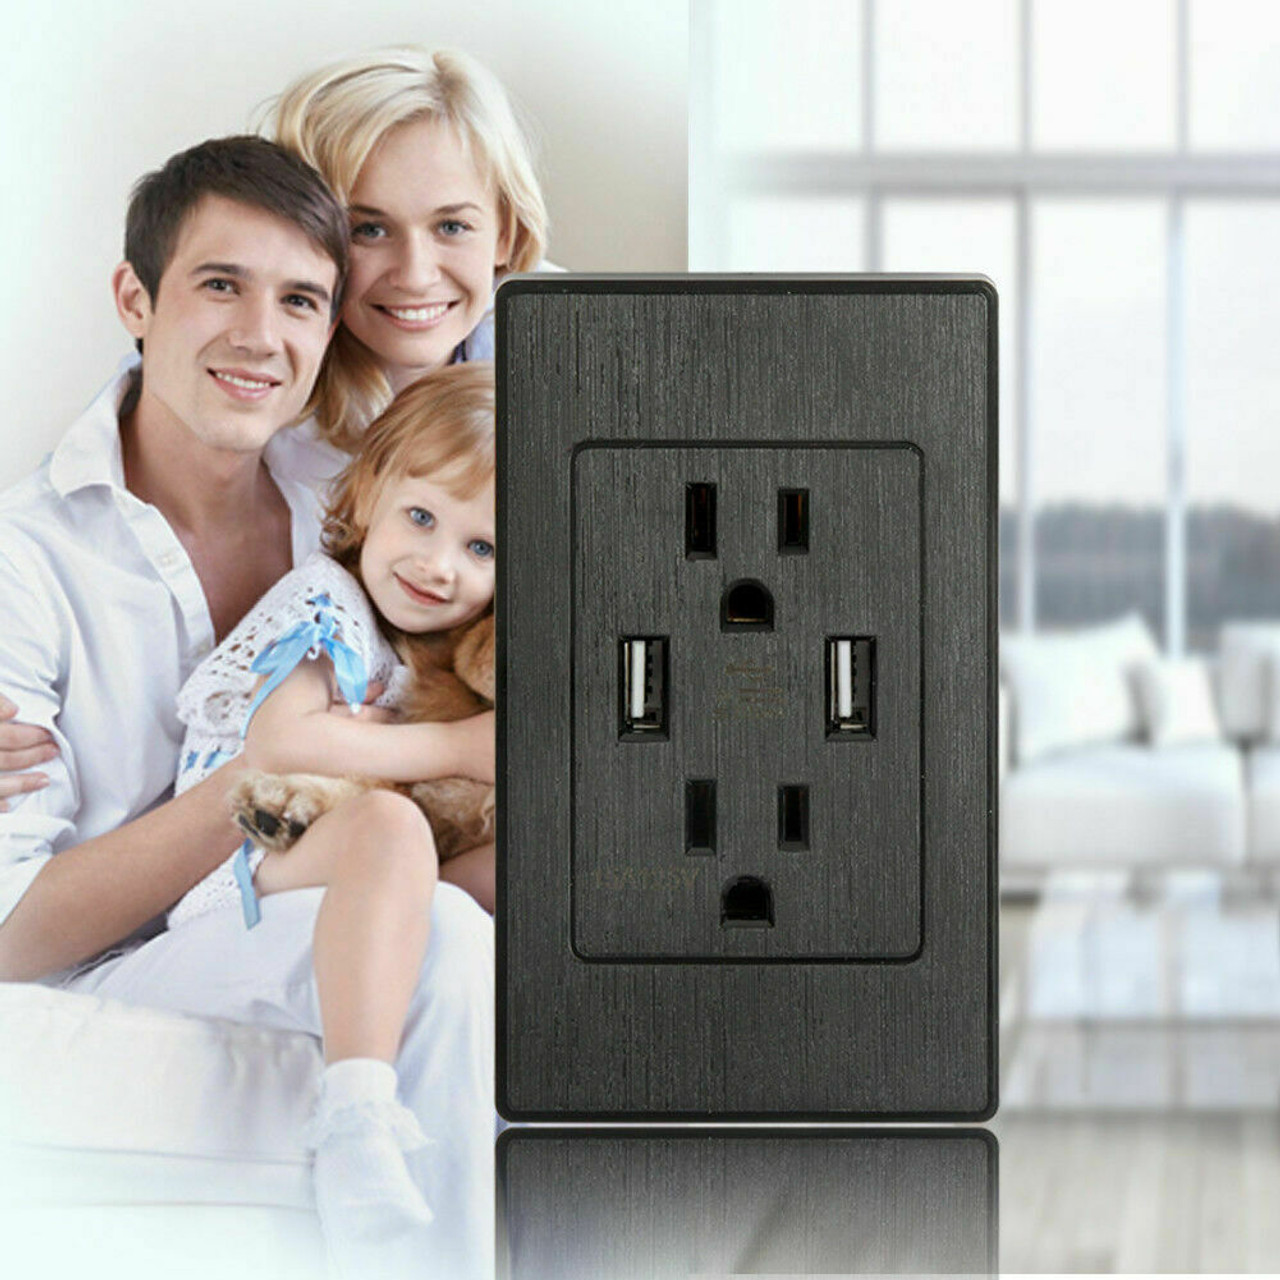 Dual USB Port Wall Socket Charger AC Power Receptacle Outlet Plate Panel 15A 110